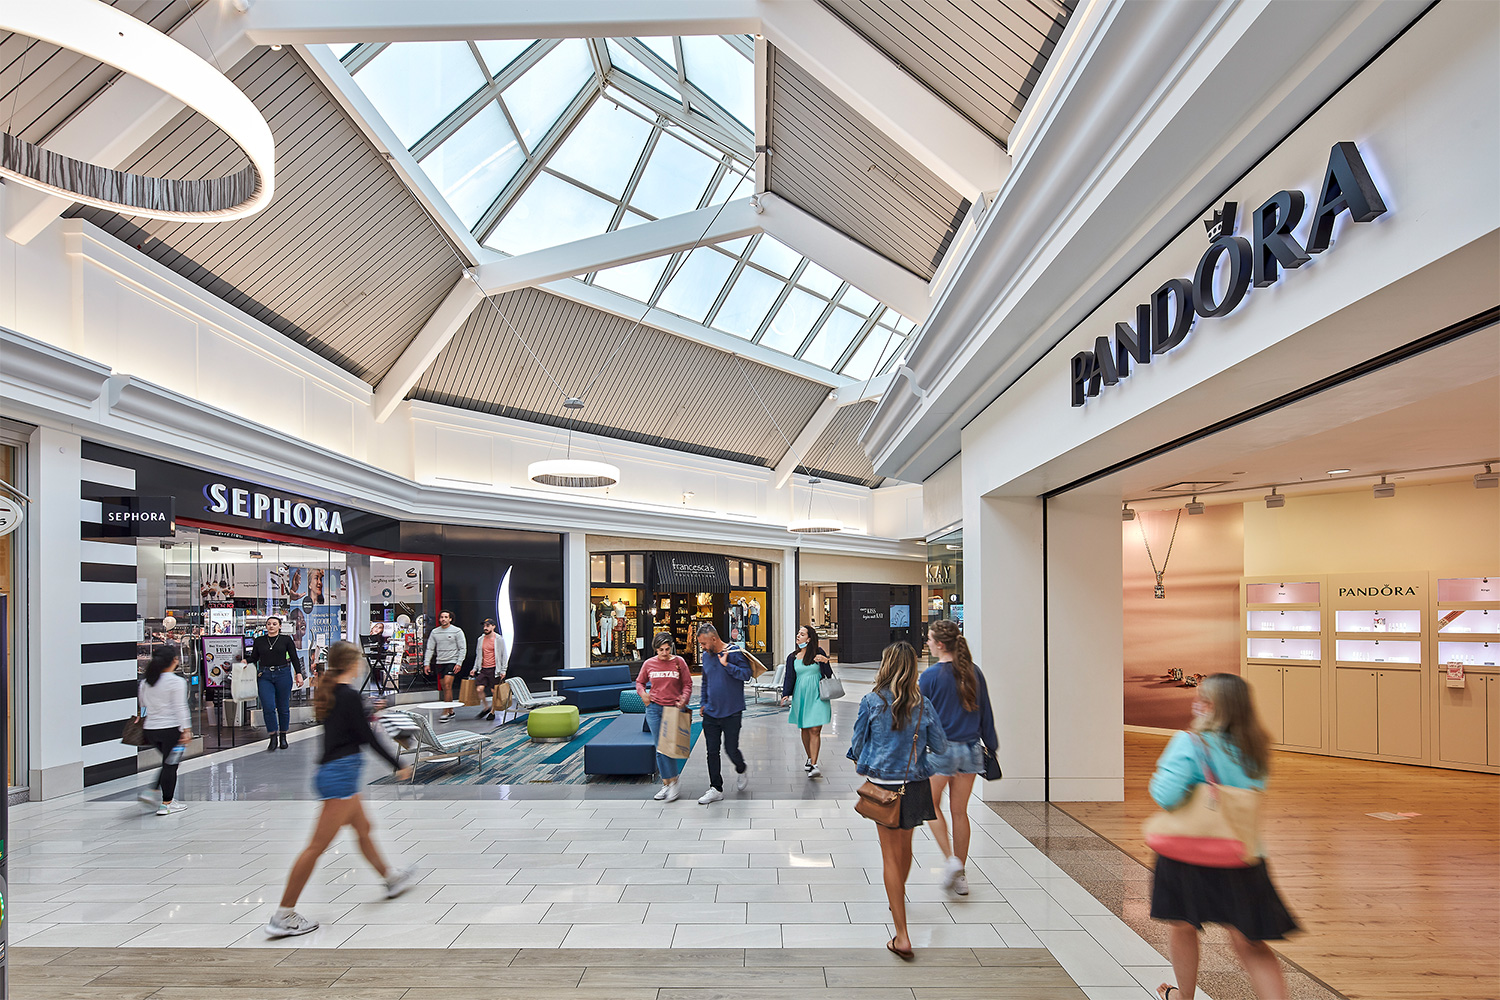 About Cape Cod Mall - A Shopping Center in Hyannis, MA - A Simon Property